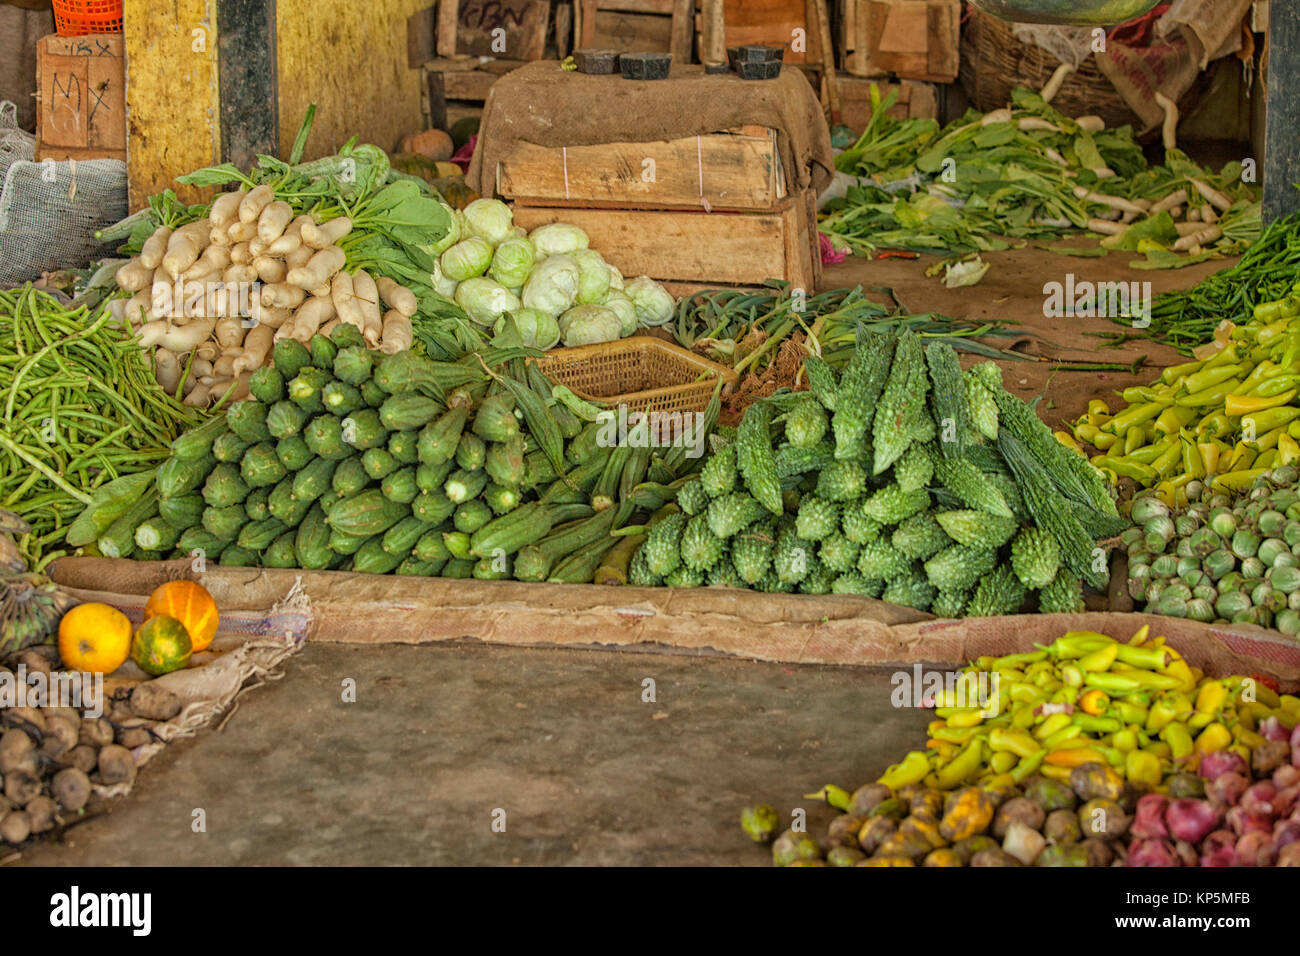 Vegetables at an indoor market stall in Sri Lanka Stock Photo